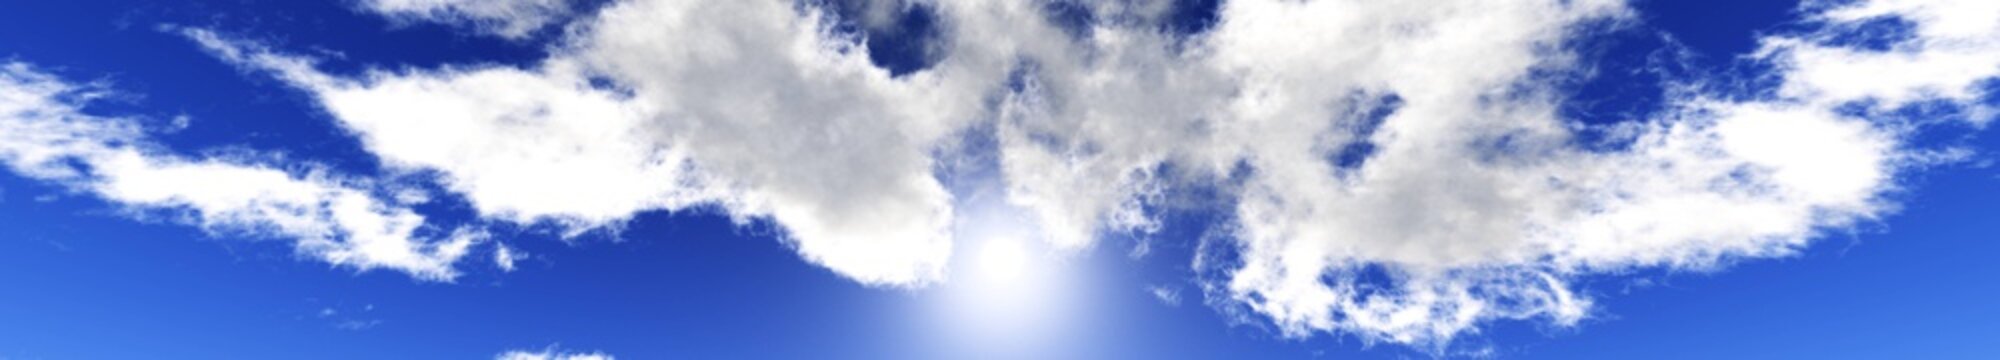 panorama of the sky with clouds and sun,
3D rendering
